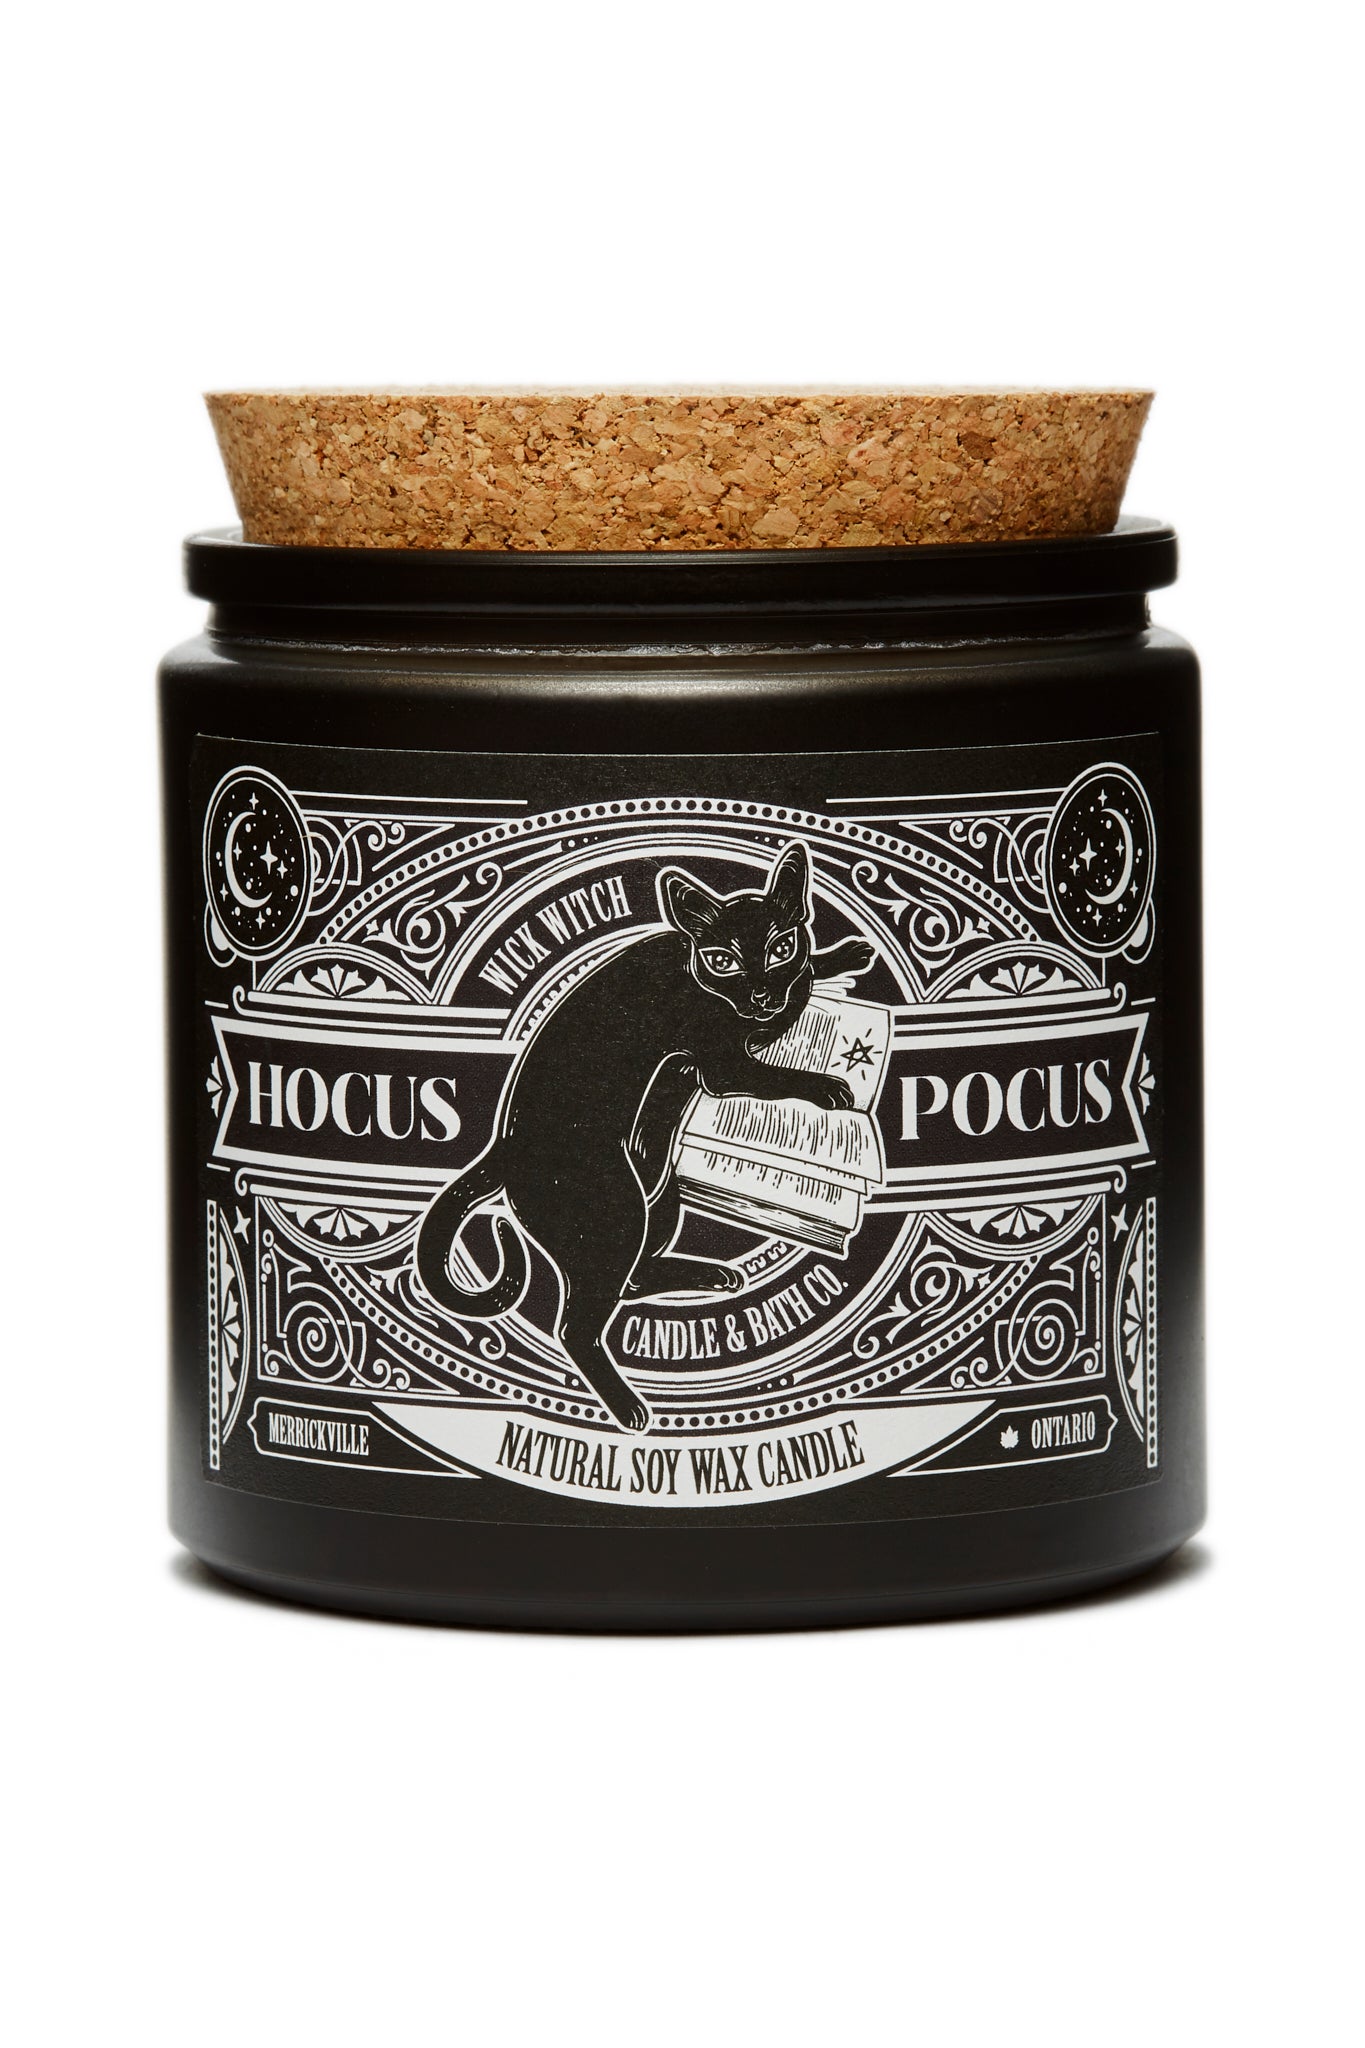 HOCUS POCUS SOY CANDLE